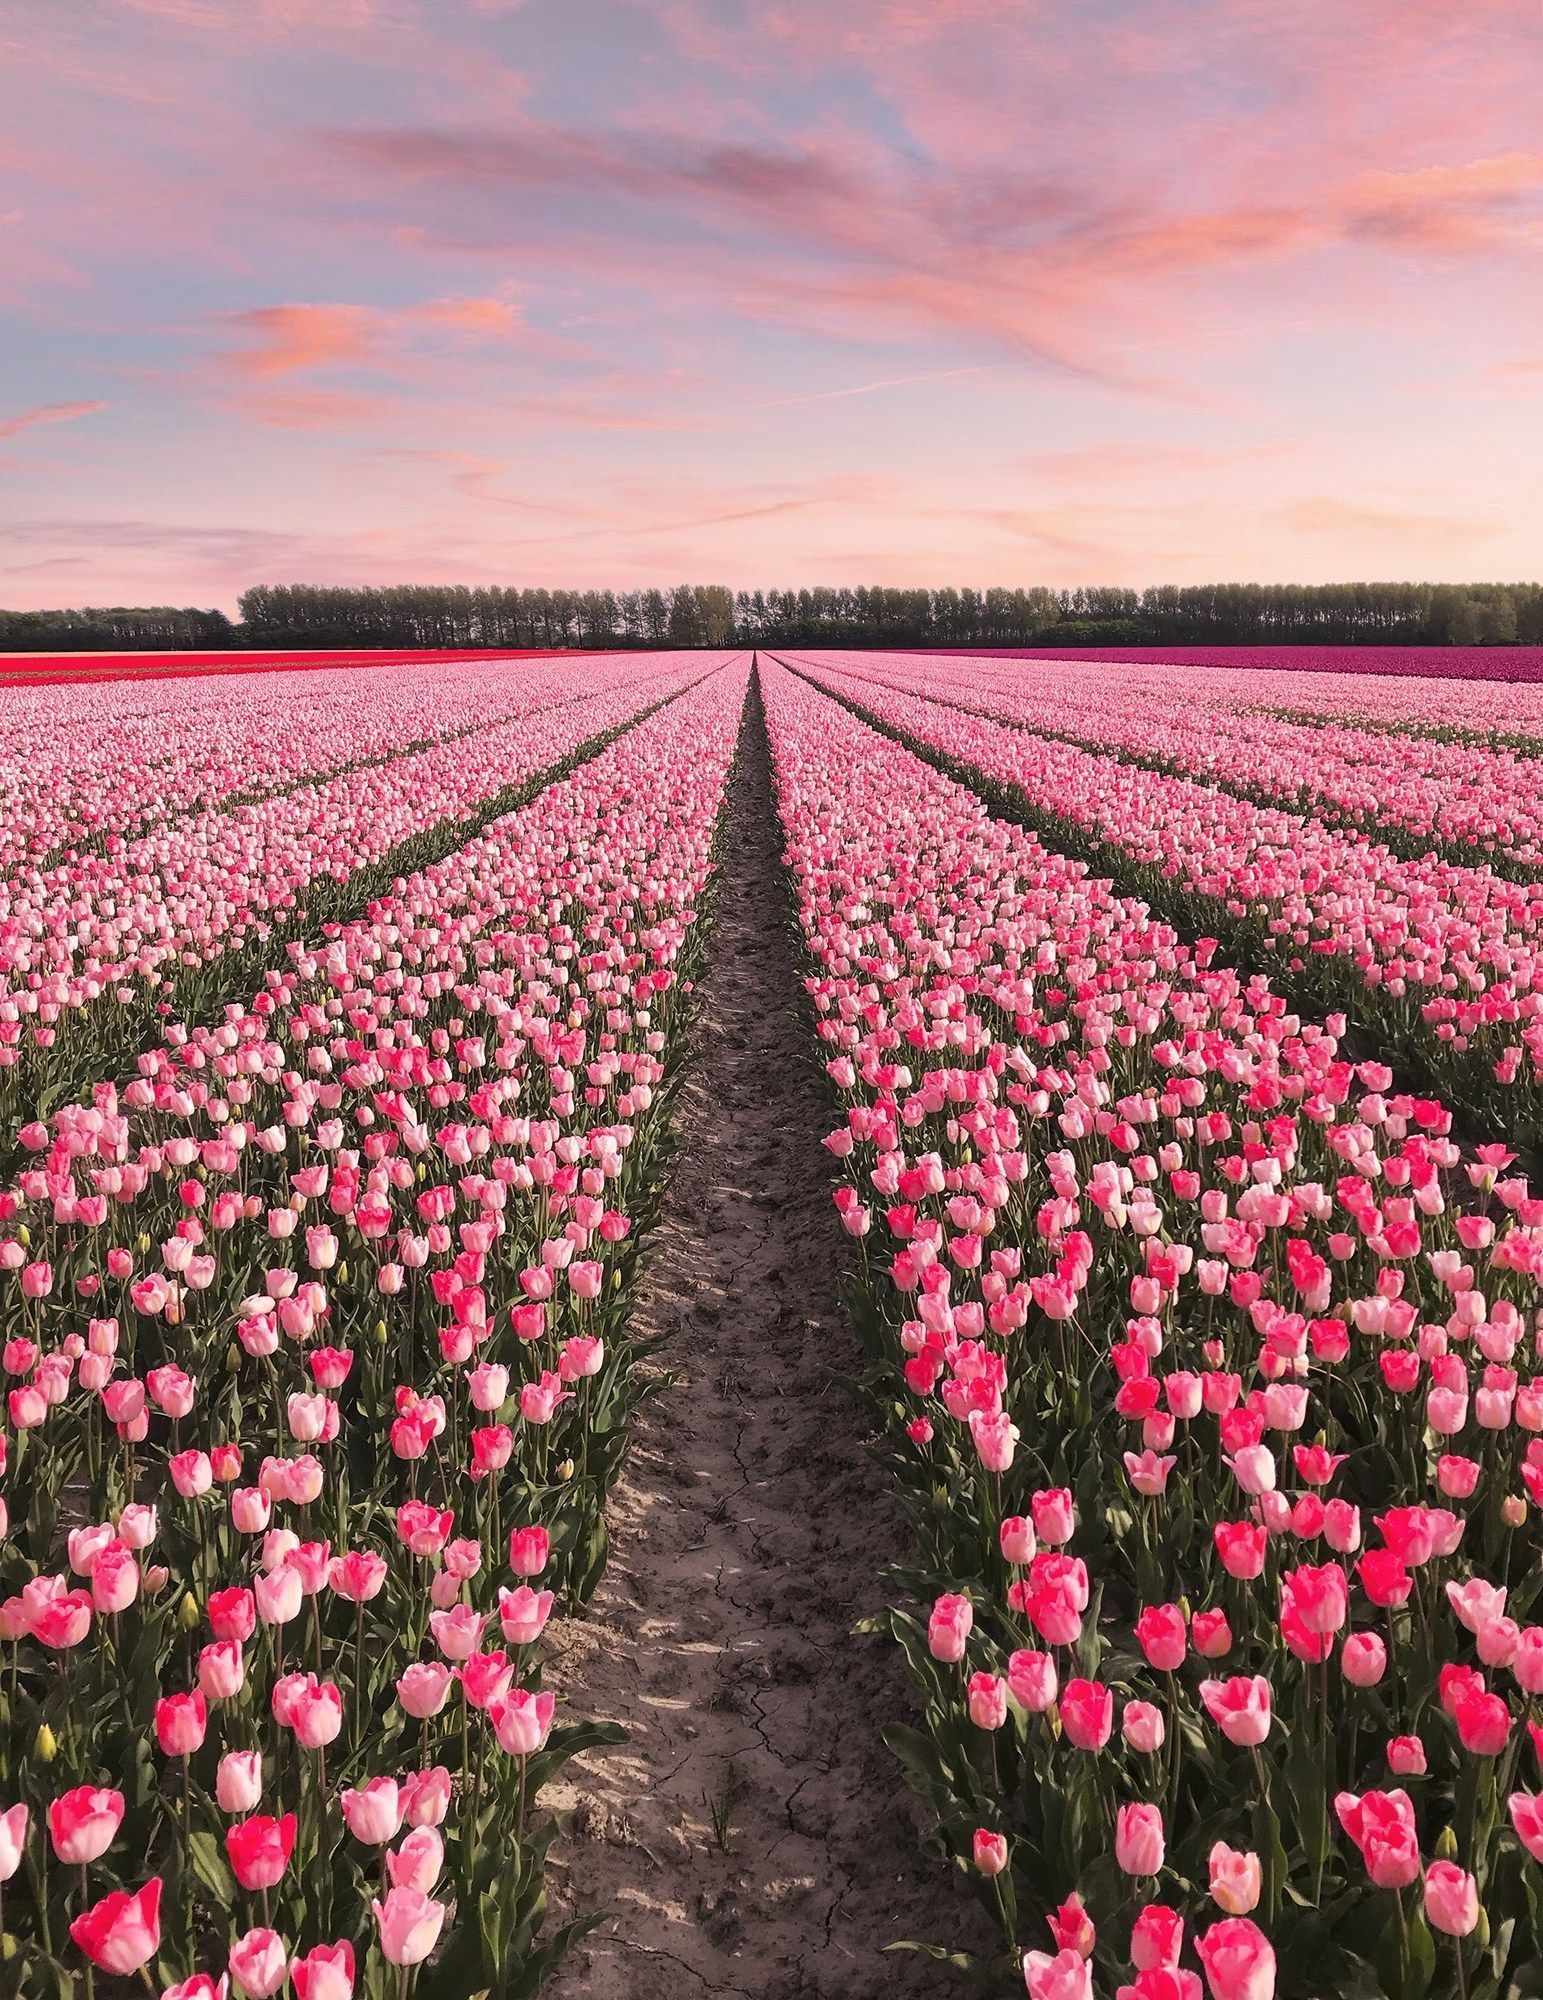 A field of pink tulips with a pink sky in the background - Garden, tulip